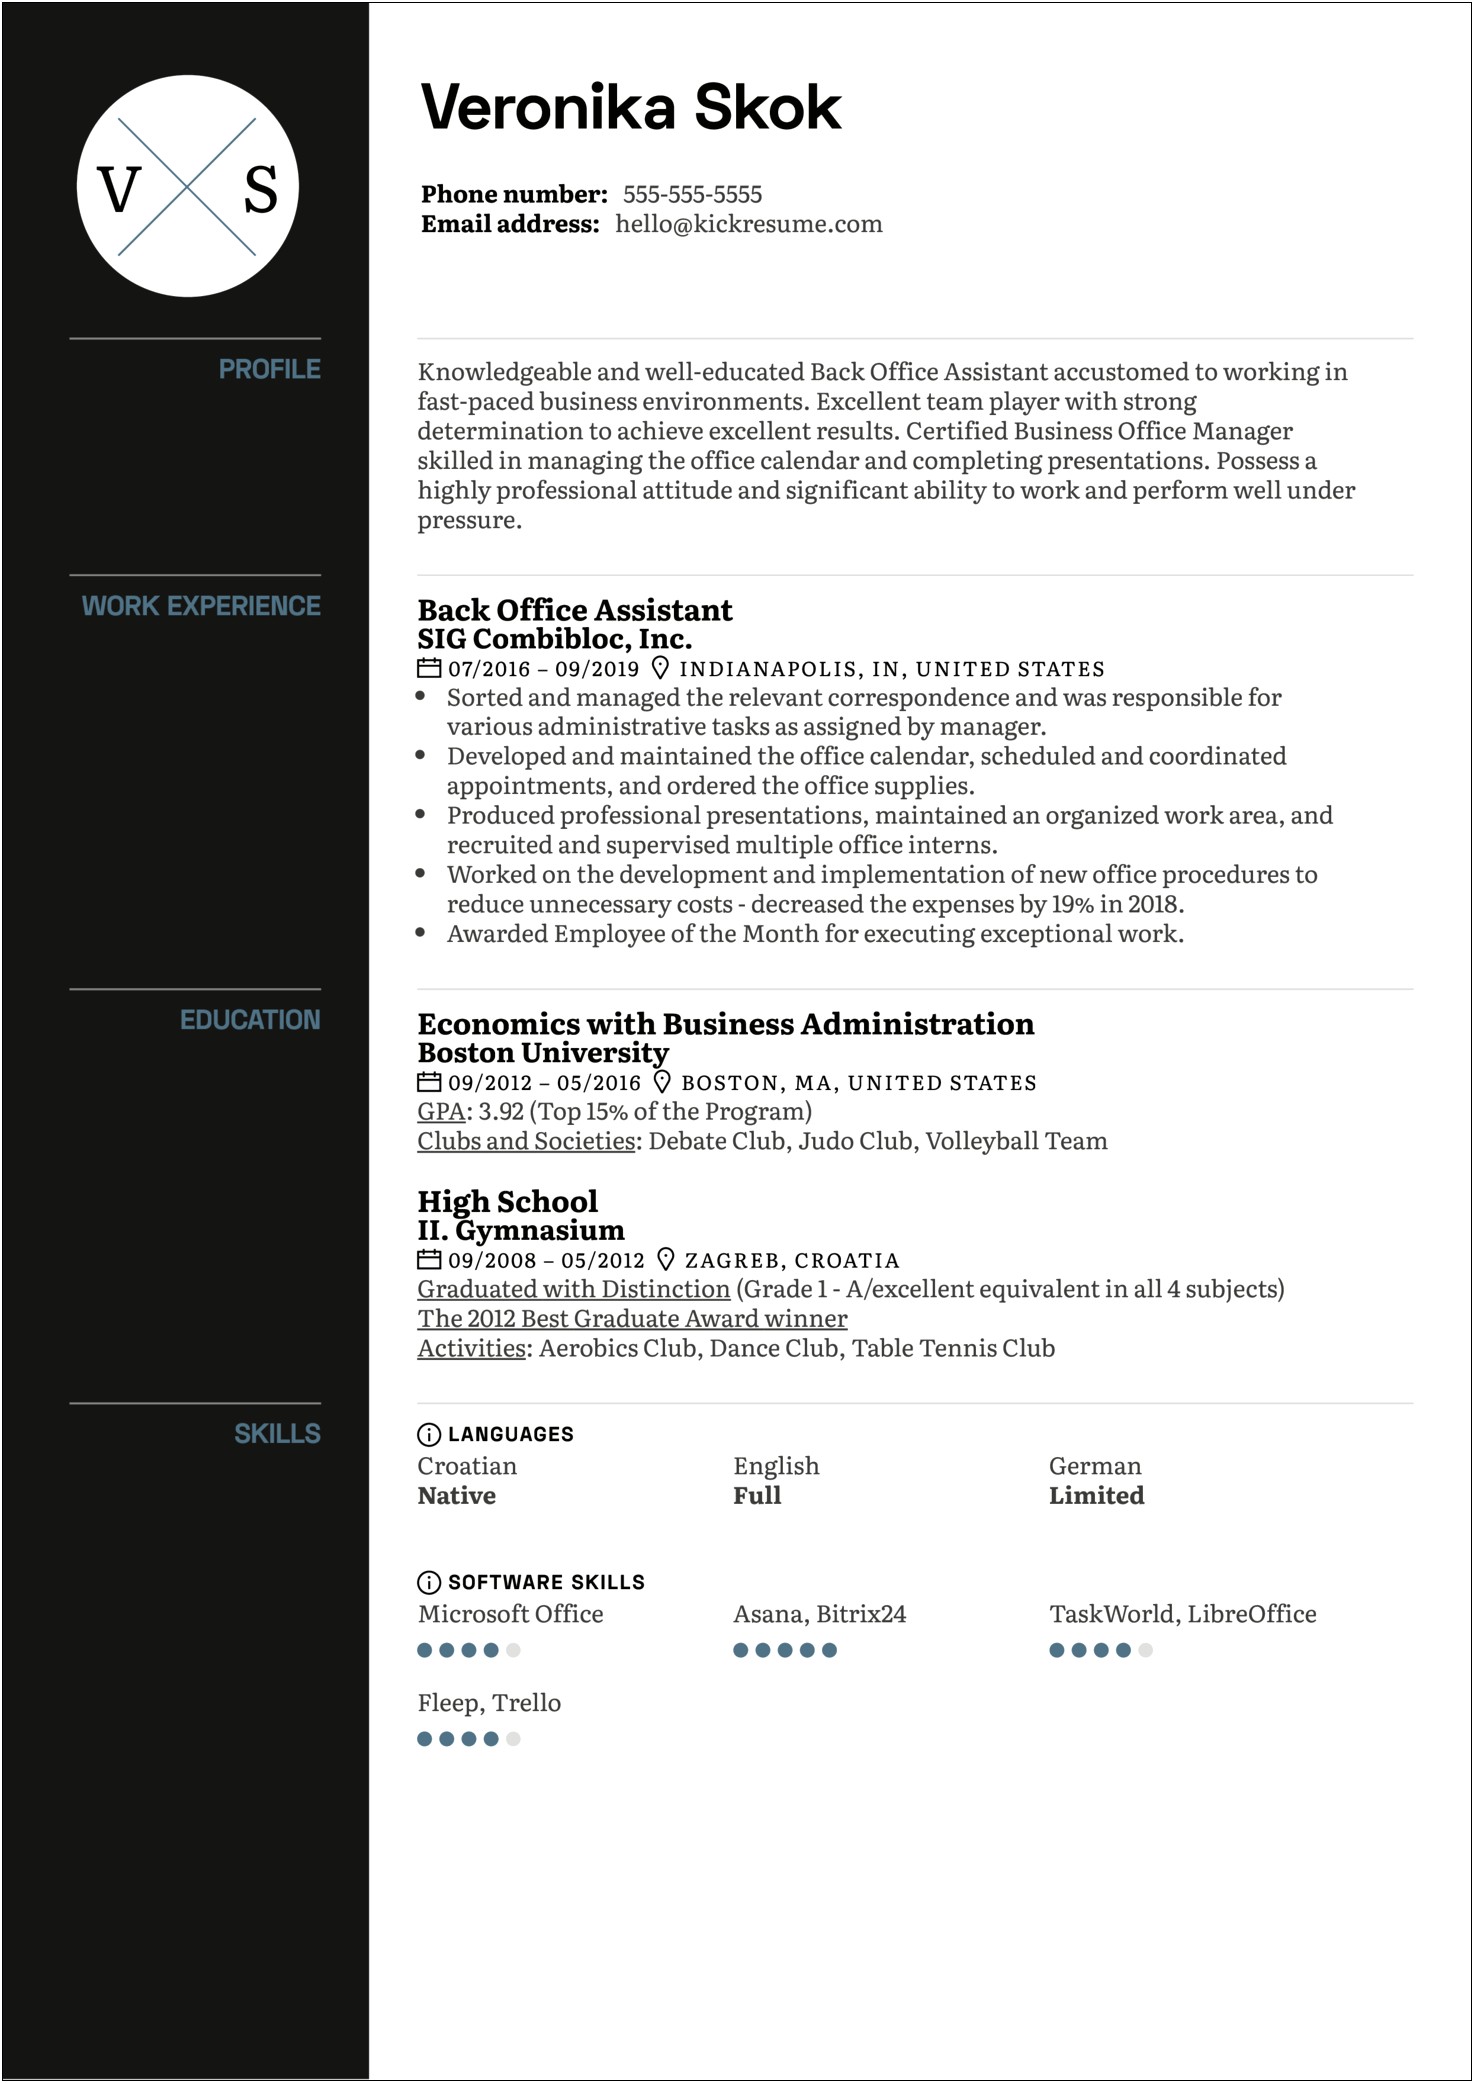 Example Administrative Assistant Resume For Office Team